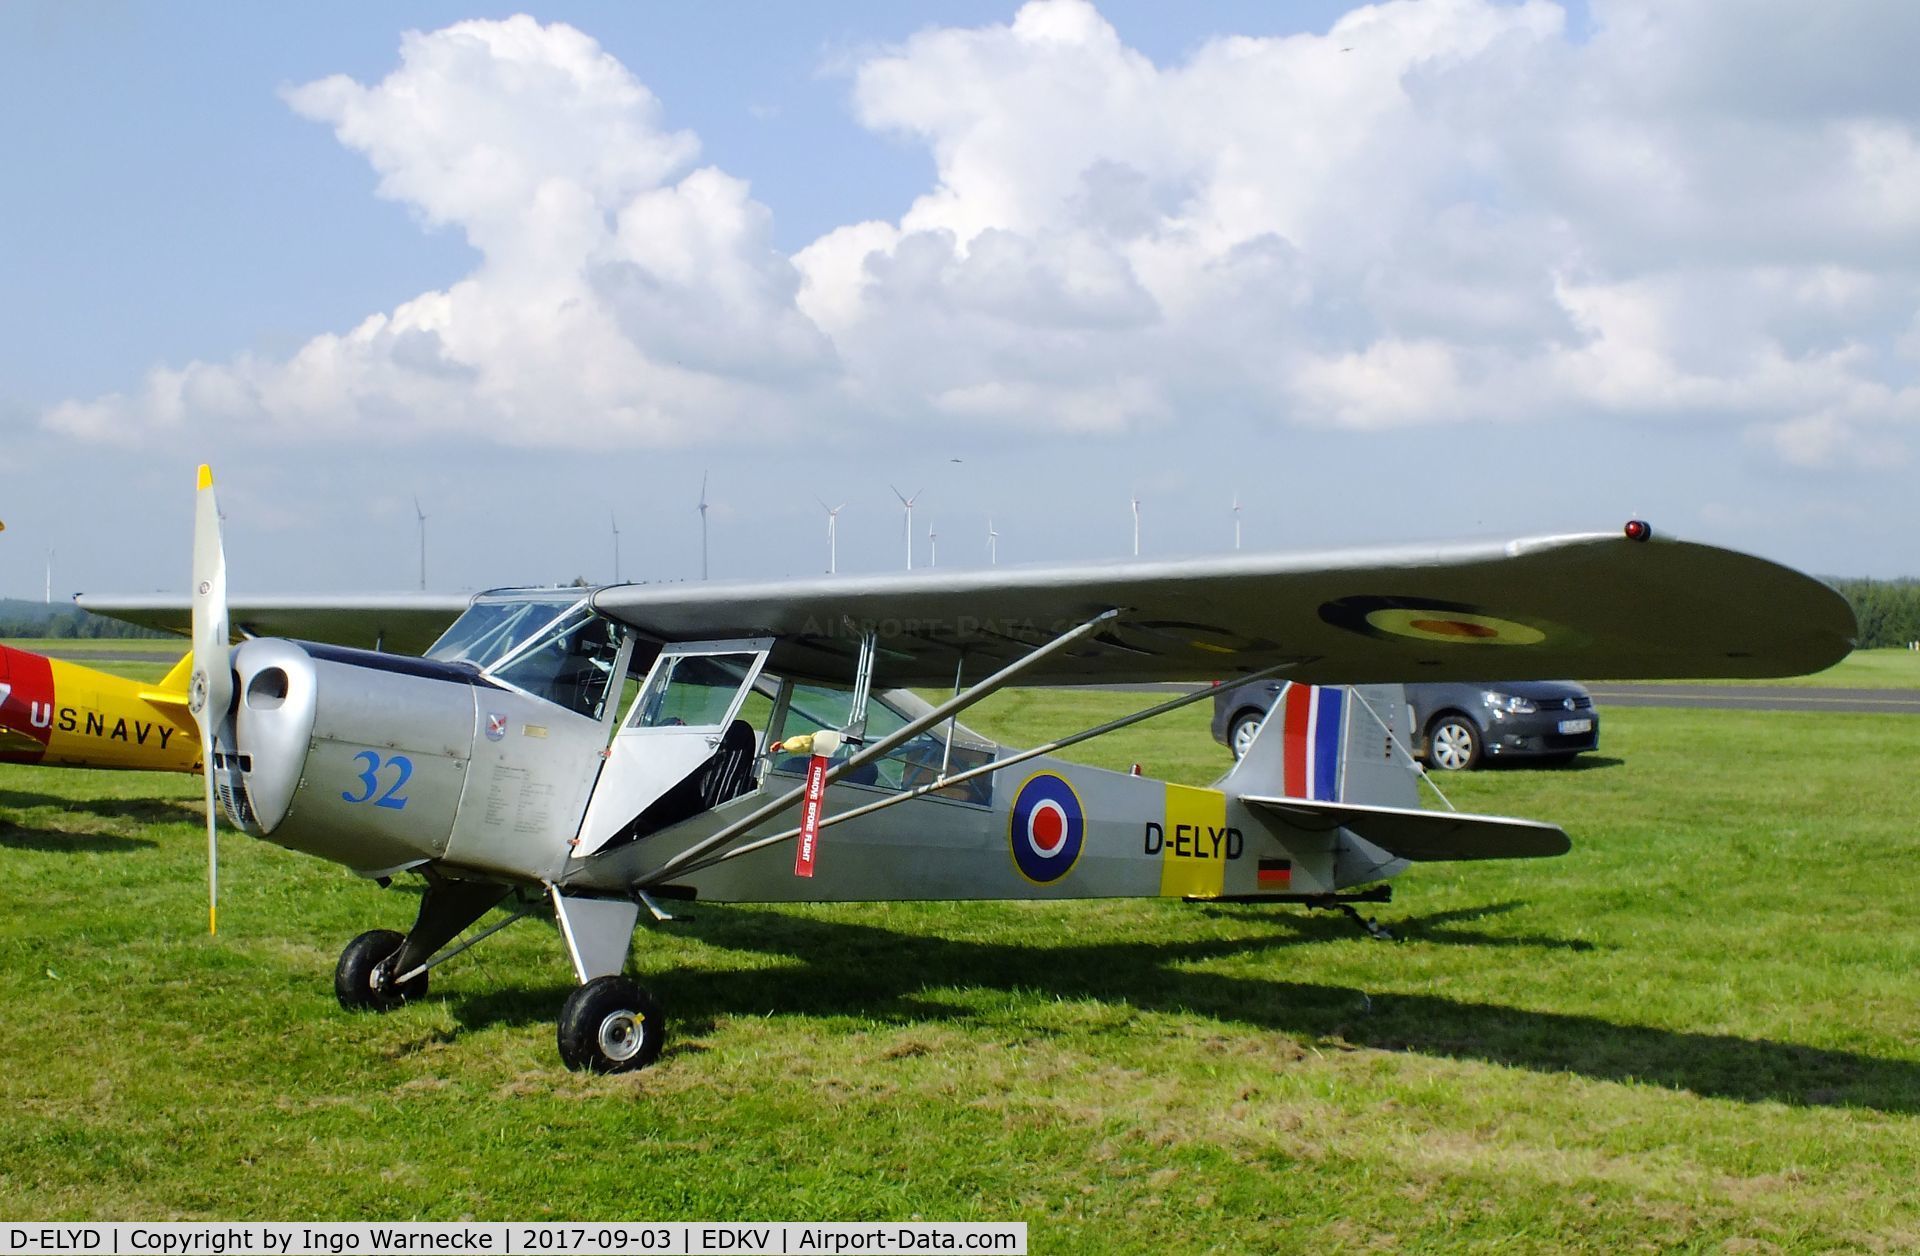 D-ELYD, 1950 Taylorcraft J Auster 5 C/N 1790, Taylorcraft J Auster 5 at the Dahlemer Binz 60th jubilee airfield display